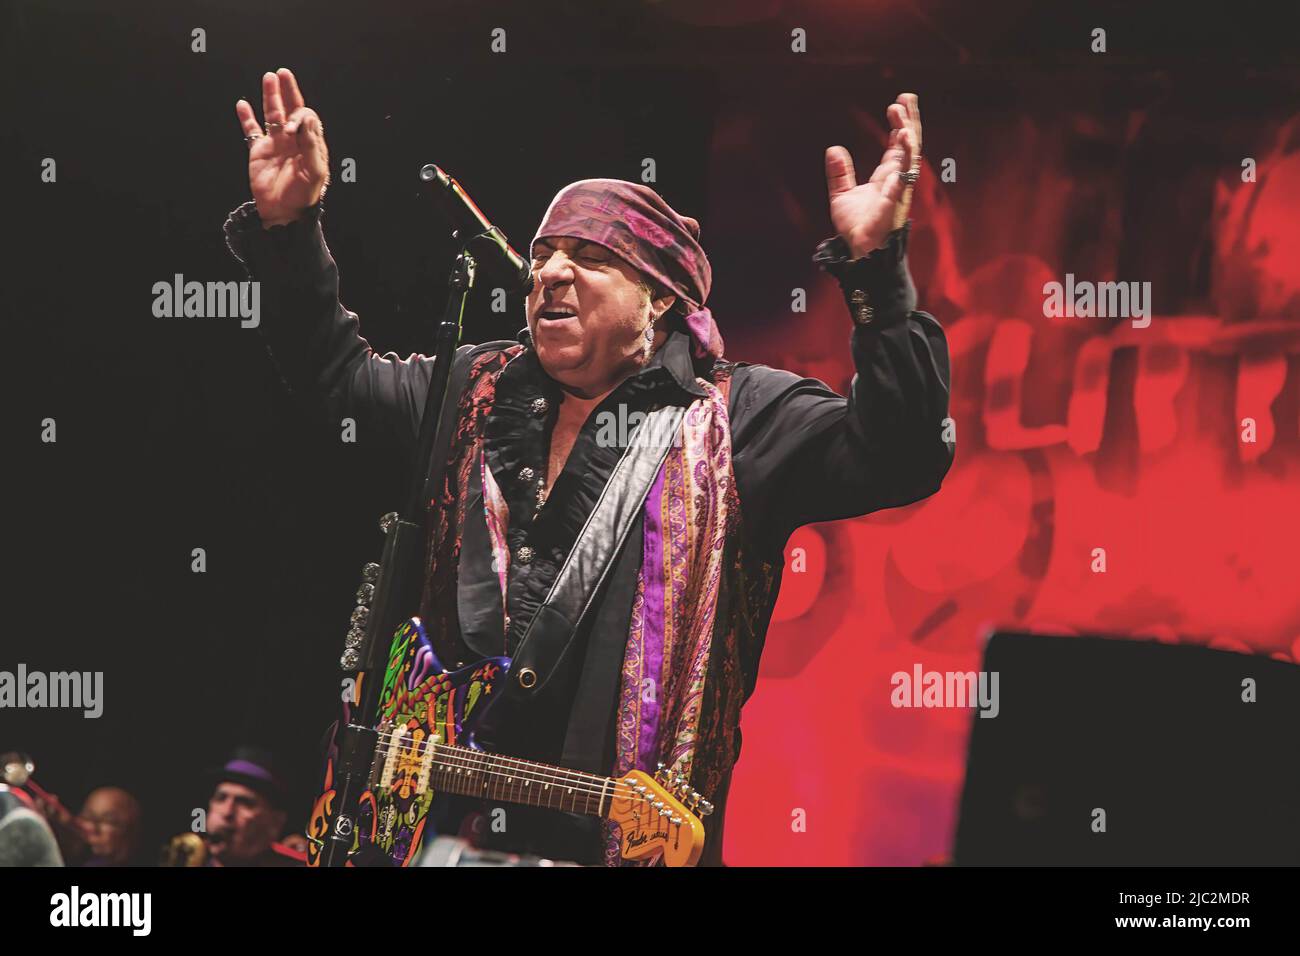 Steven Van Zandt (born Steven Lento known as Little Steven or Miami Steve), he is best known as a member of Bruce Springsteen's E Street Band, performs live on stage with his band the Disciples of Soul at Villa Ada in Rome. Stock Photo